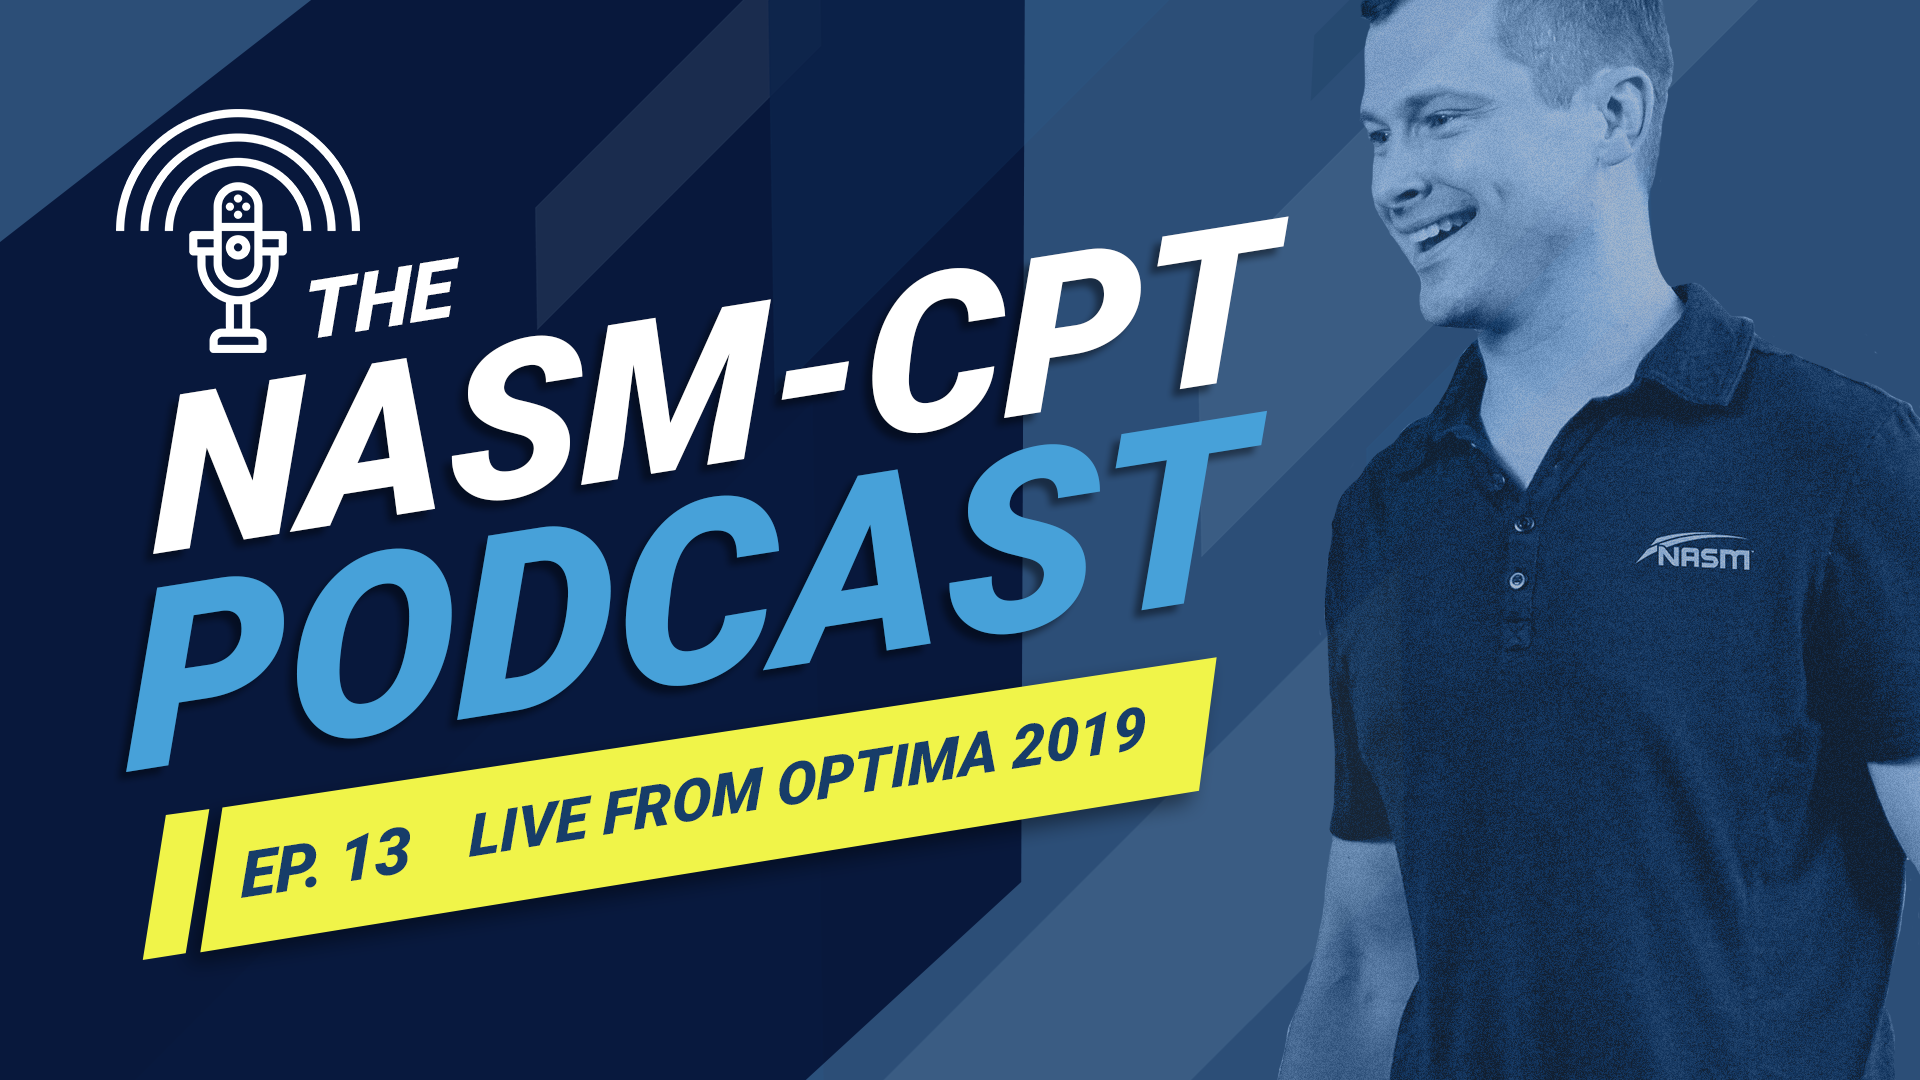 The Clenbuterolfr-CPT Podcast: Live from Optima 2019 Conference